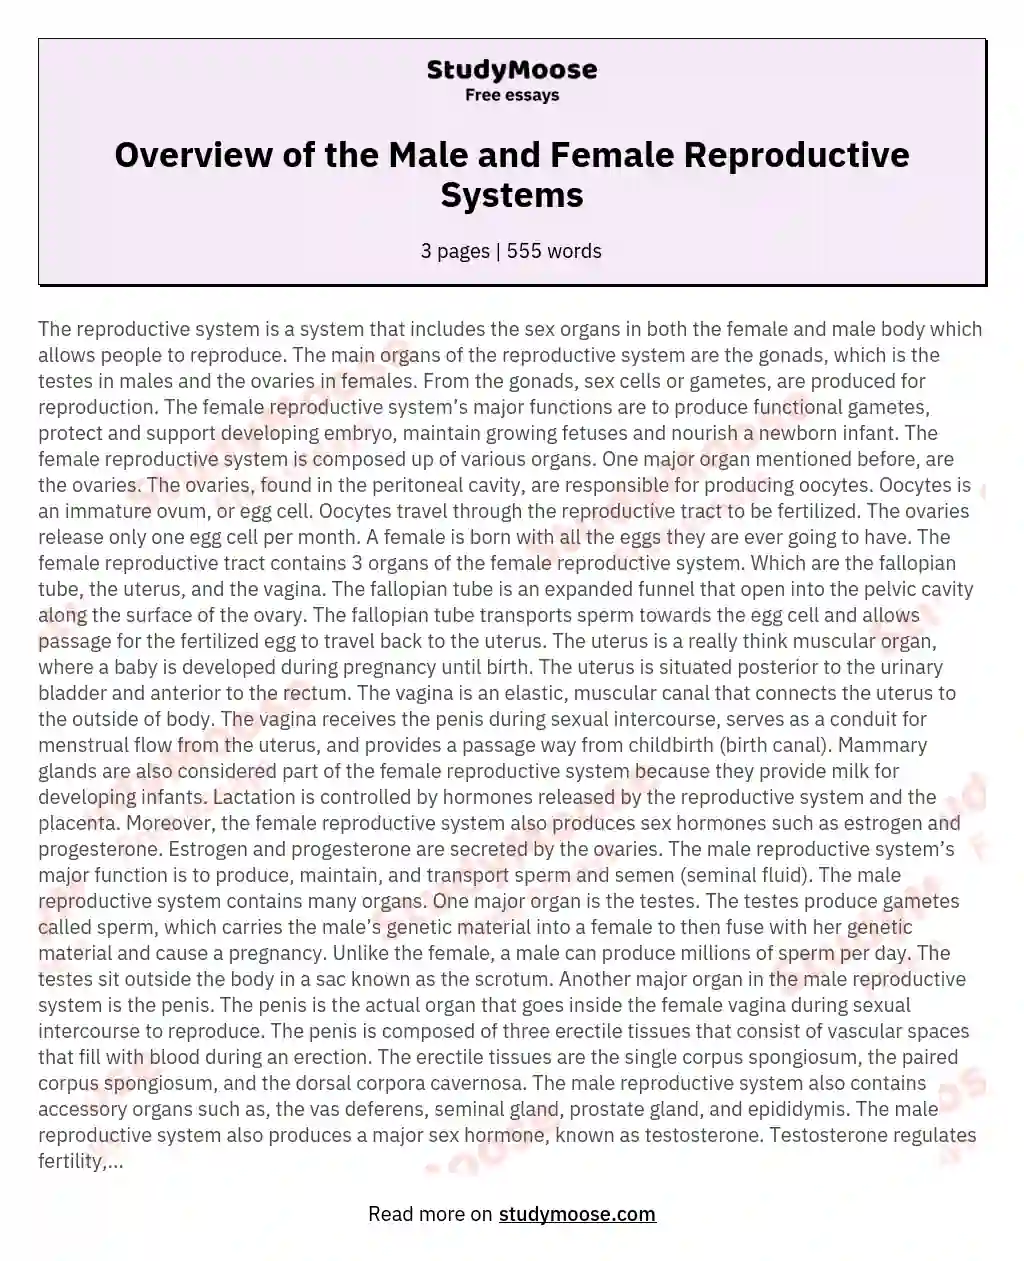 Overview of the Male and Female Reproductive Systems